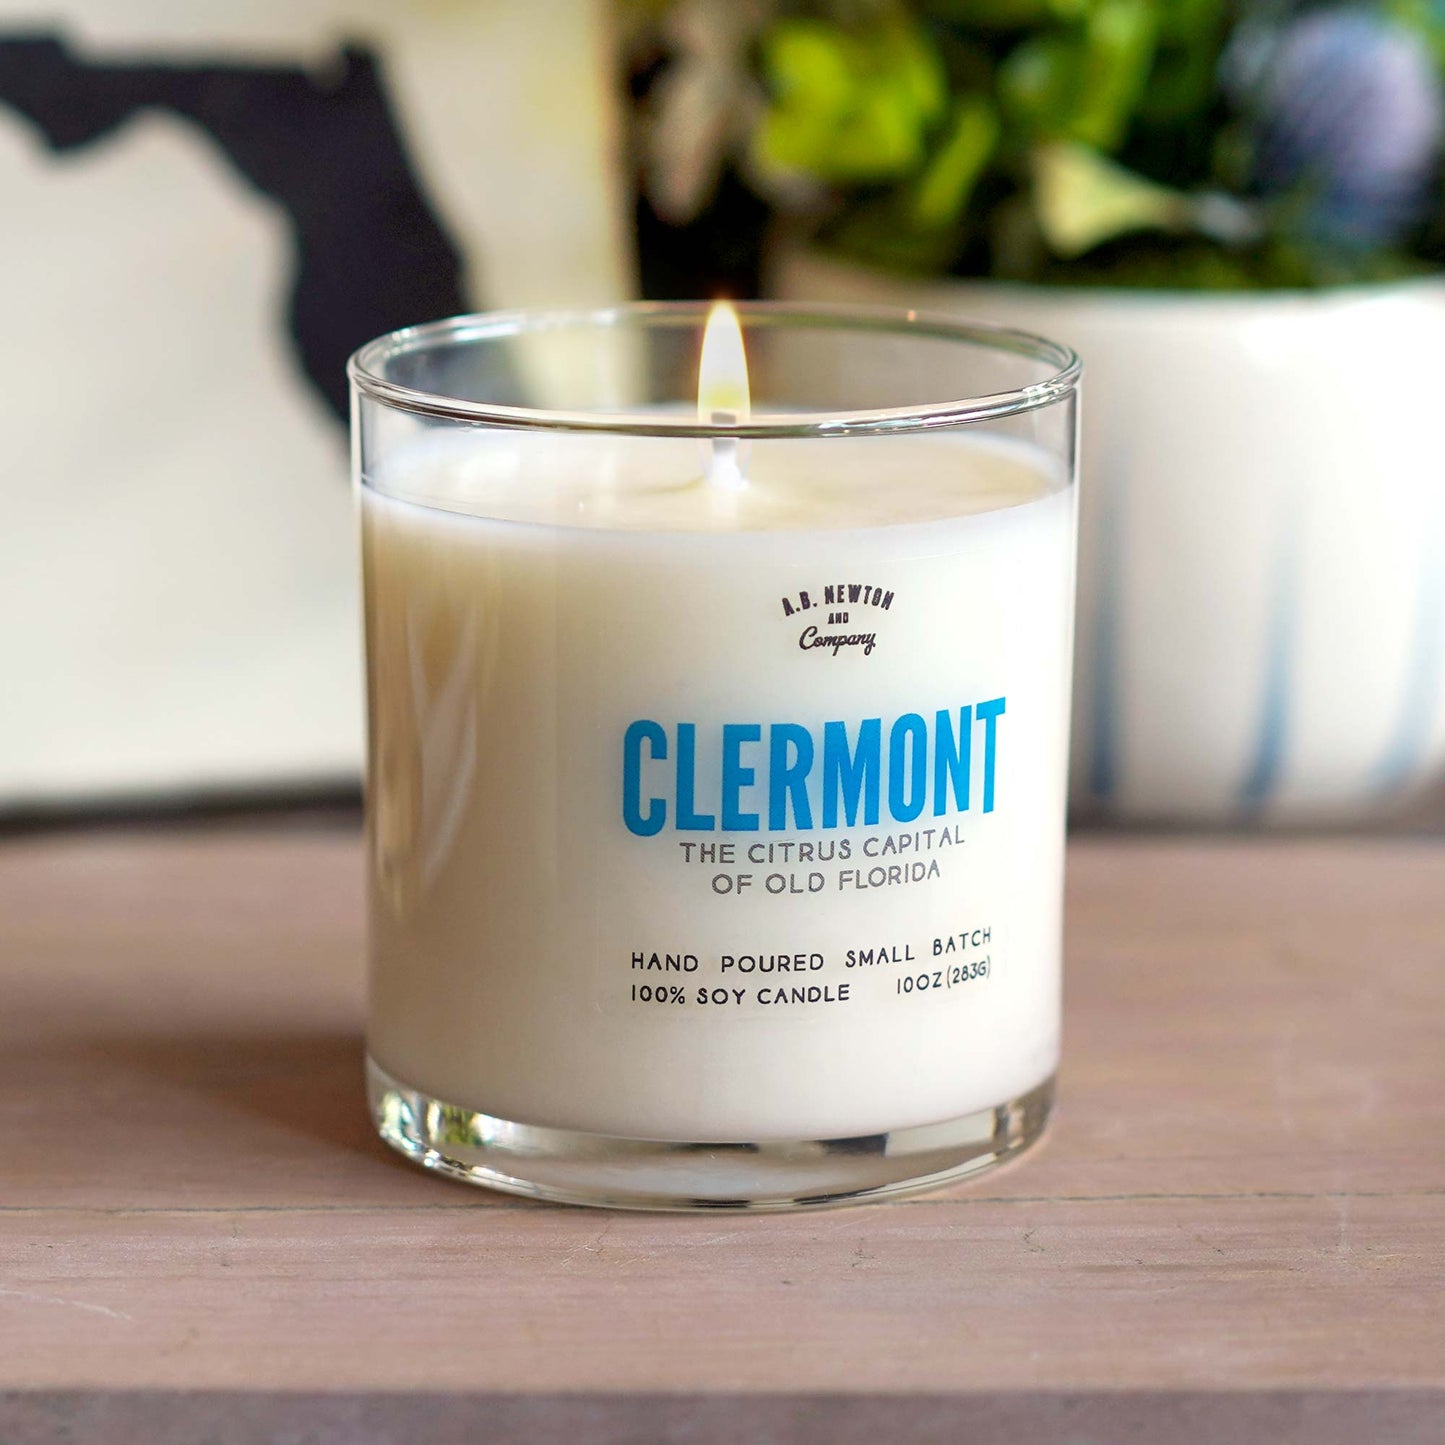 Clermont Soy Candle Hand Poured Small Batch